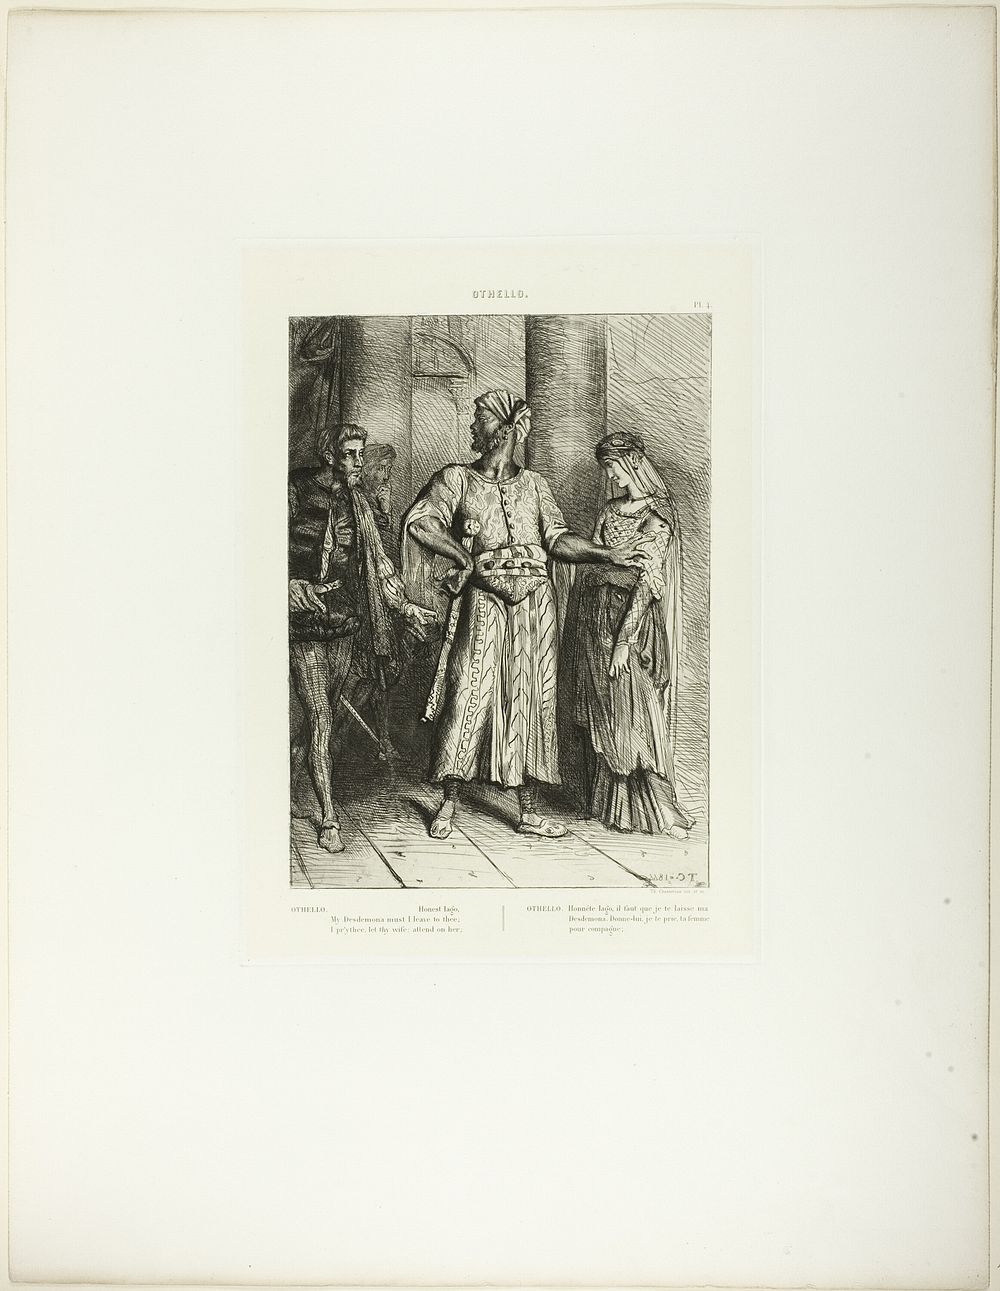 Honest Iago, Desdemona Must I Leave to Thee, plate 4 (act 1, scene 3), from Othello by Théodore Chassériau